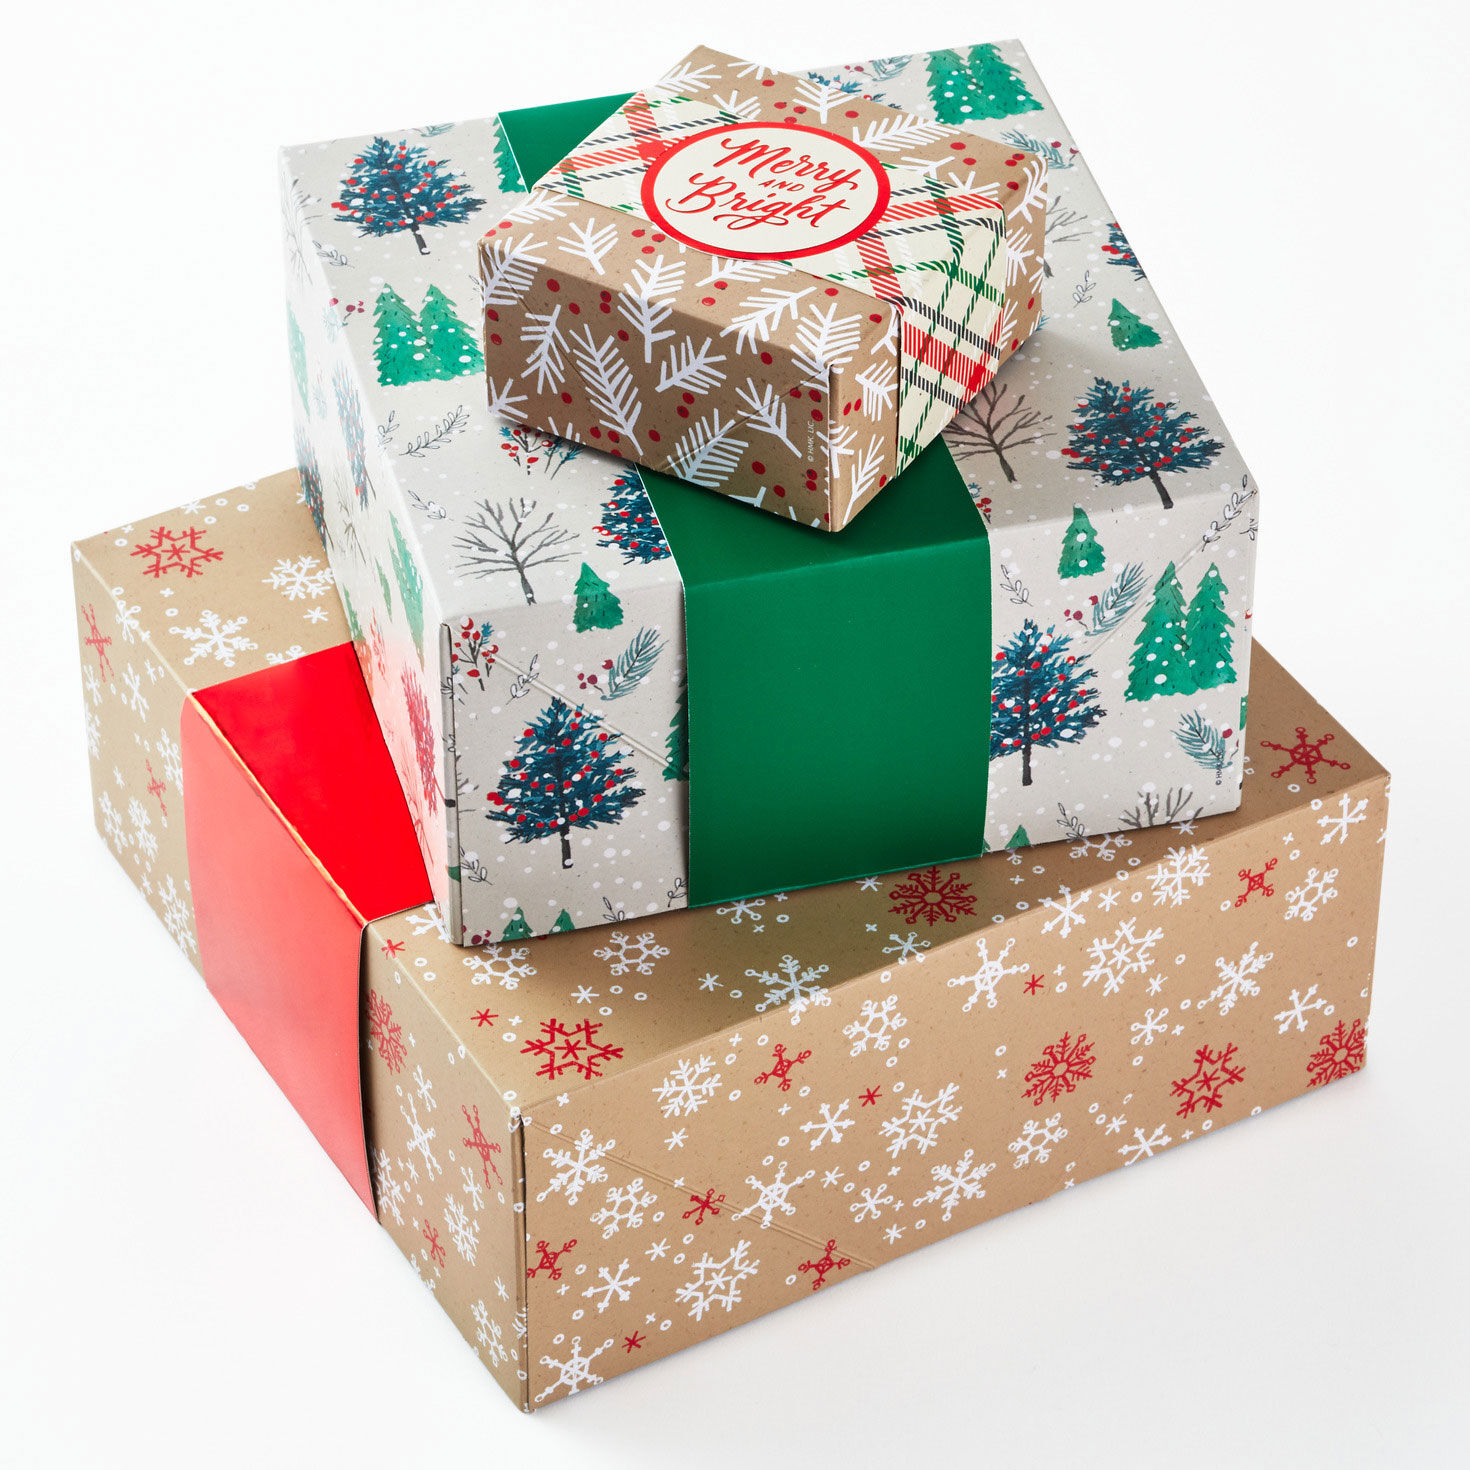 Merry and Bright 3-Pack Christmas Gift Boxes, Assorted Sizes and Designs for only USD 12.99 | Hallmark